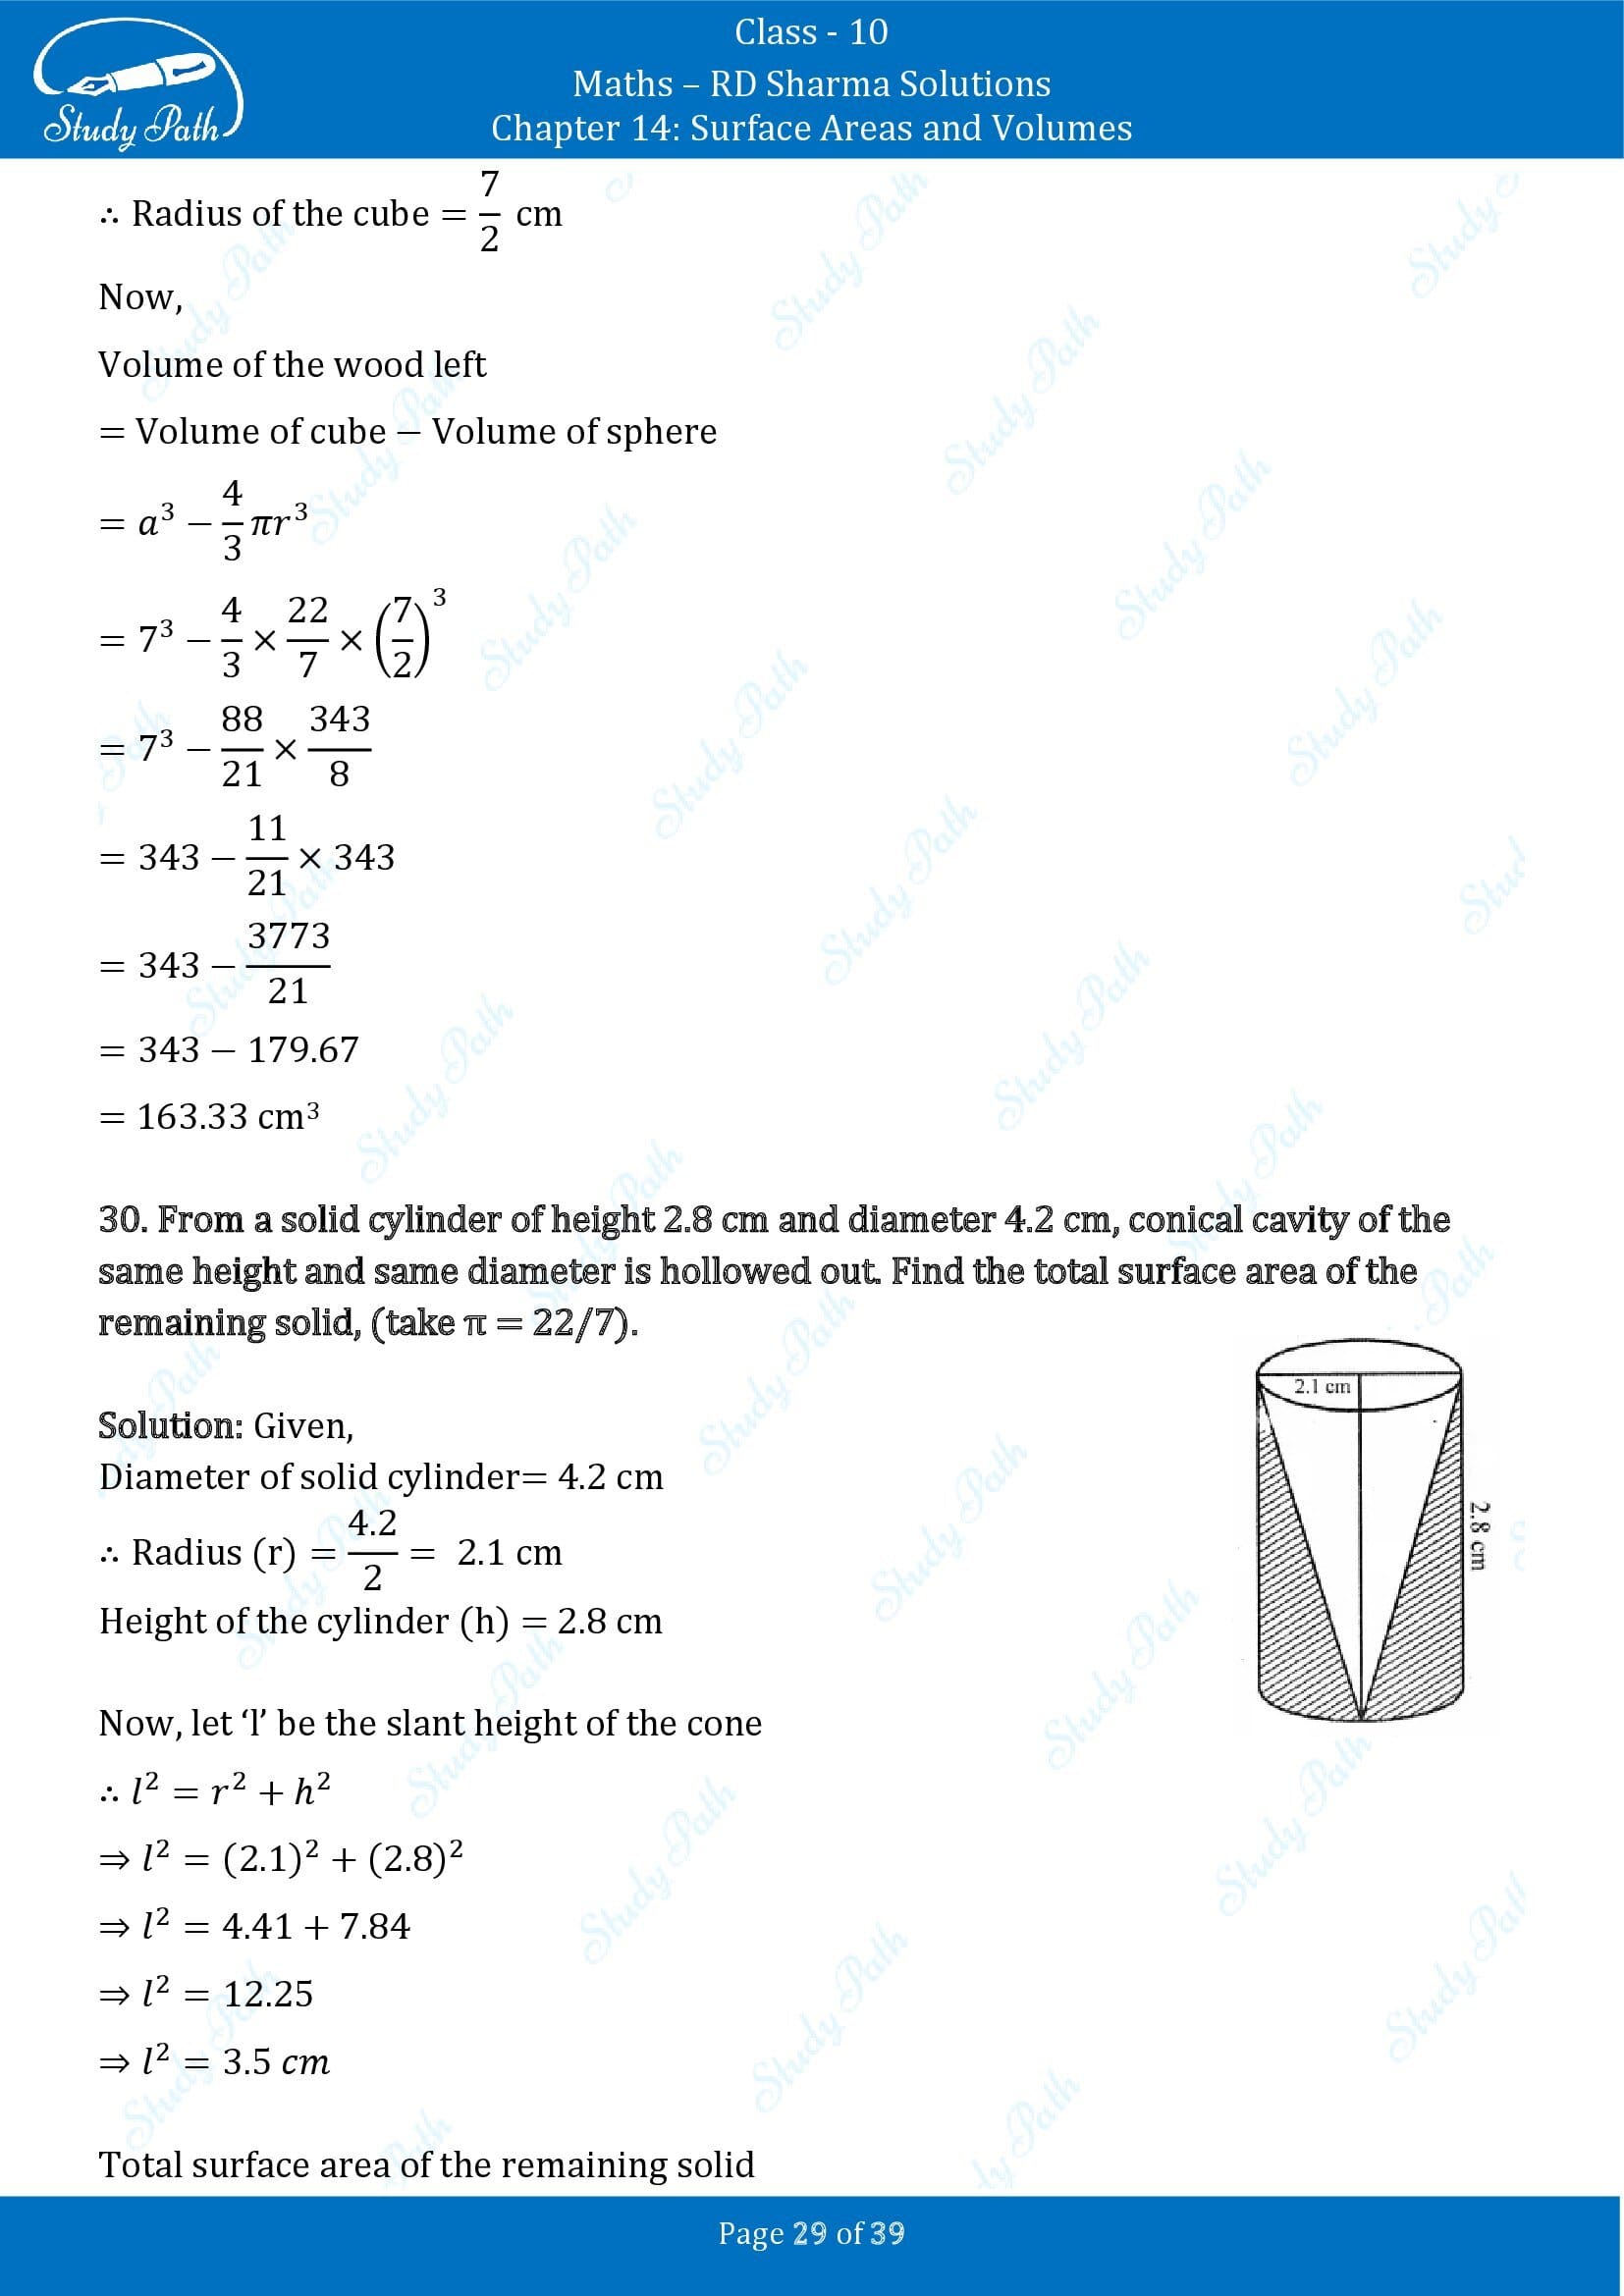 RD Sharma Solutions Class 10 Chapter 14 Surface Areas and Volumes Exercise 14.2 00029